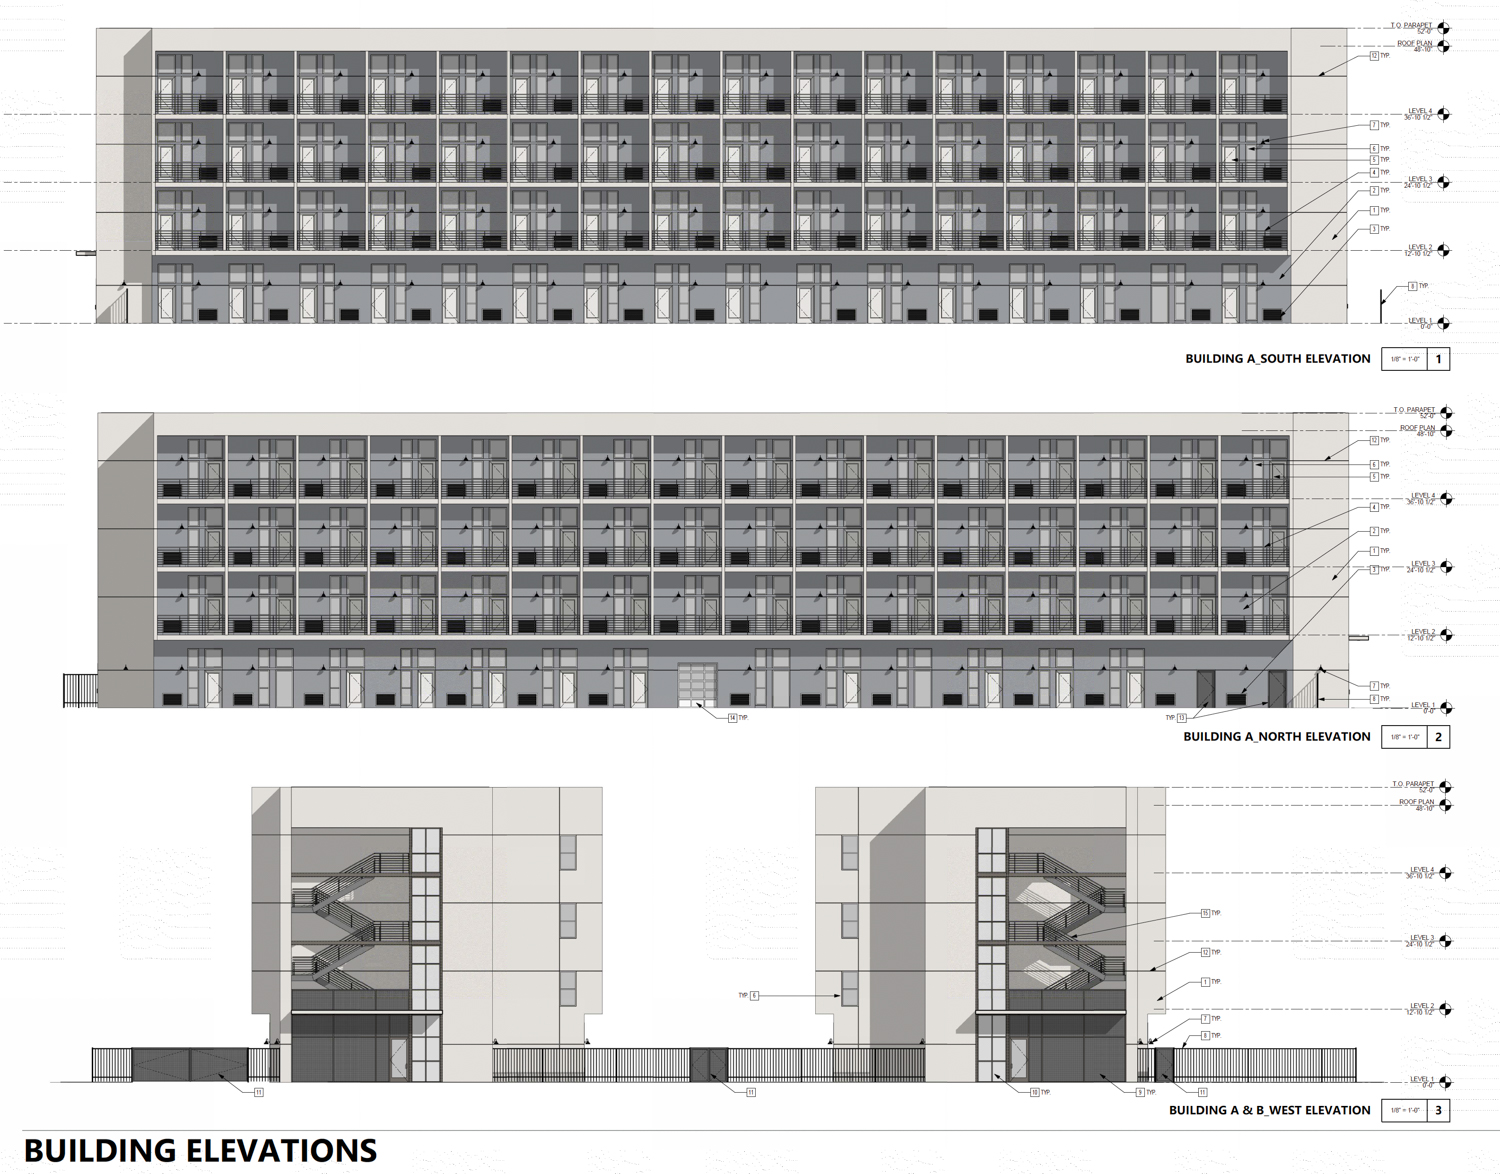 7141 Woodbine Avenue vertical facade elevations, illustration by 19Six Architects